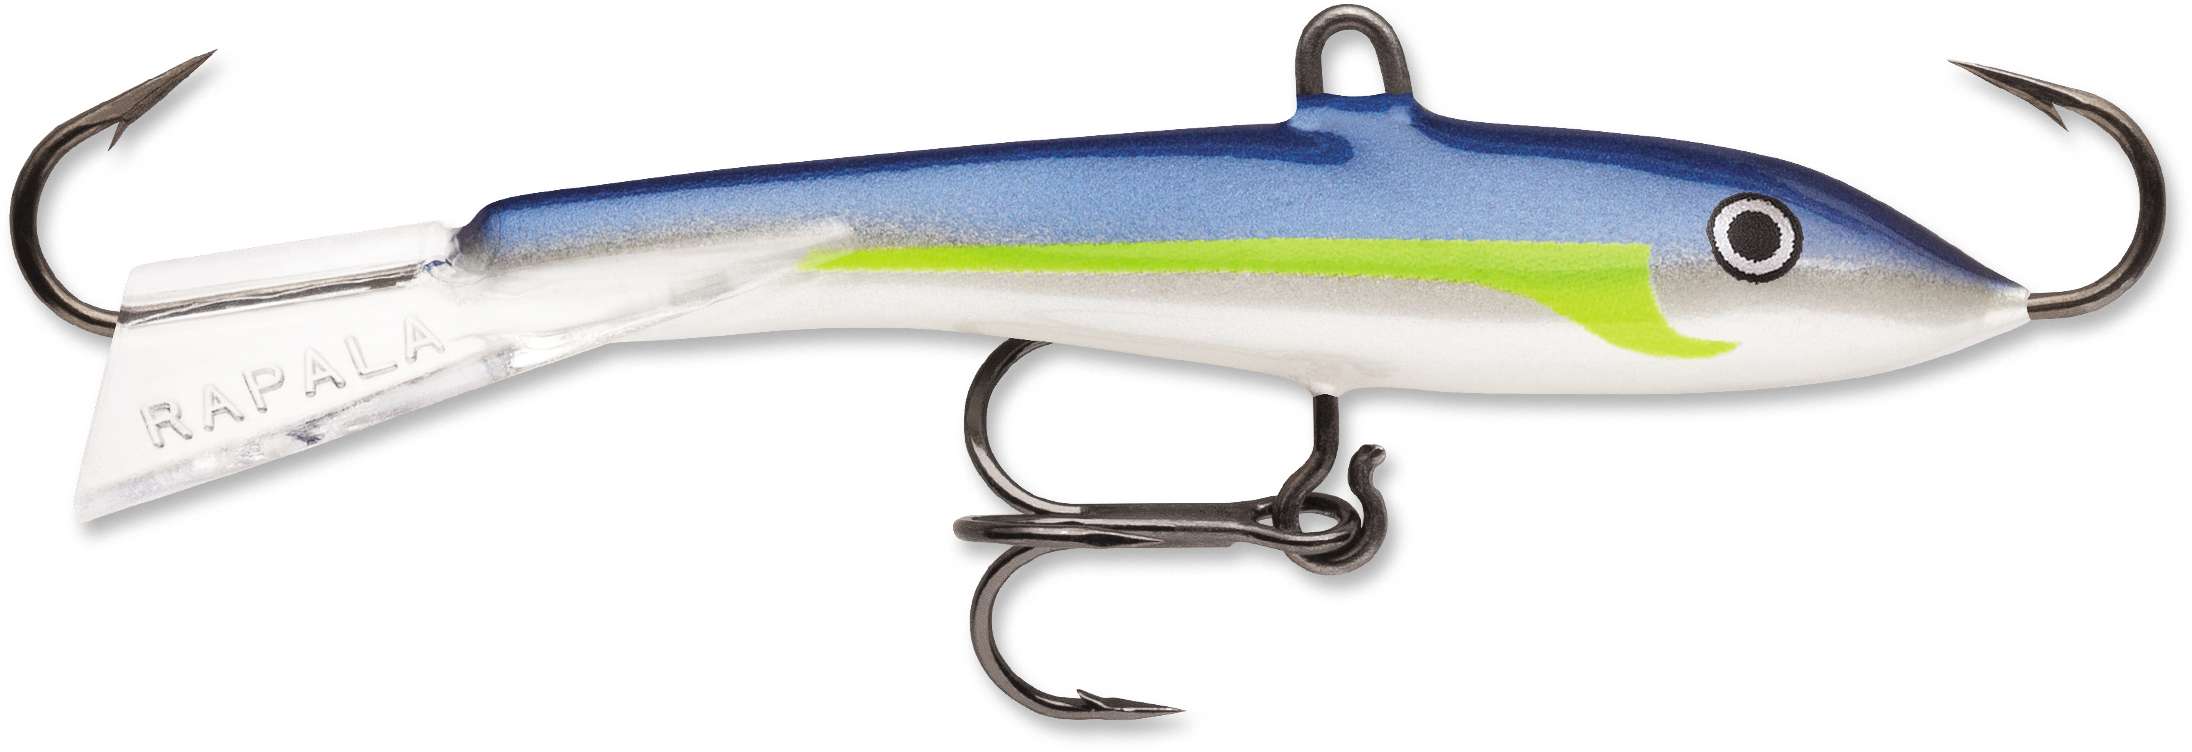 <b>Rapala</b><br>	Jigging Rap (new colors)<br>	Originally designed as an ice fishing lure 40 years ago, many bass fisherman know that the Jigging Rap will also catch bass. New this year are a host of colors, including Helsinki Shad, seen above. 